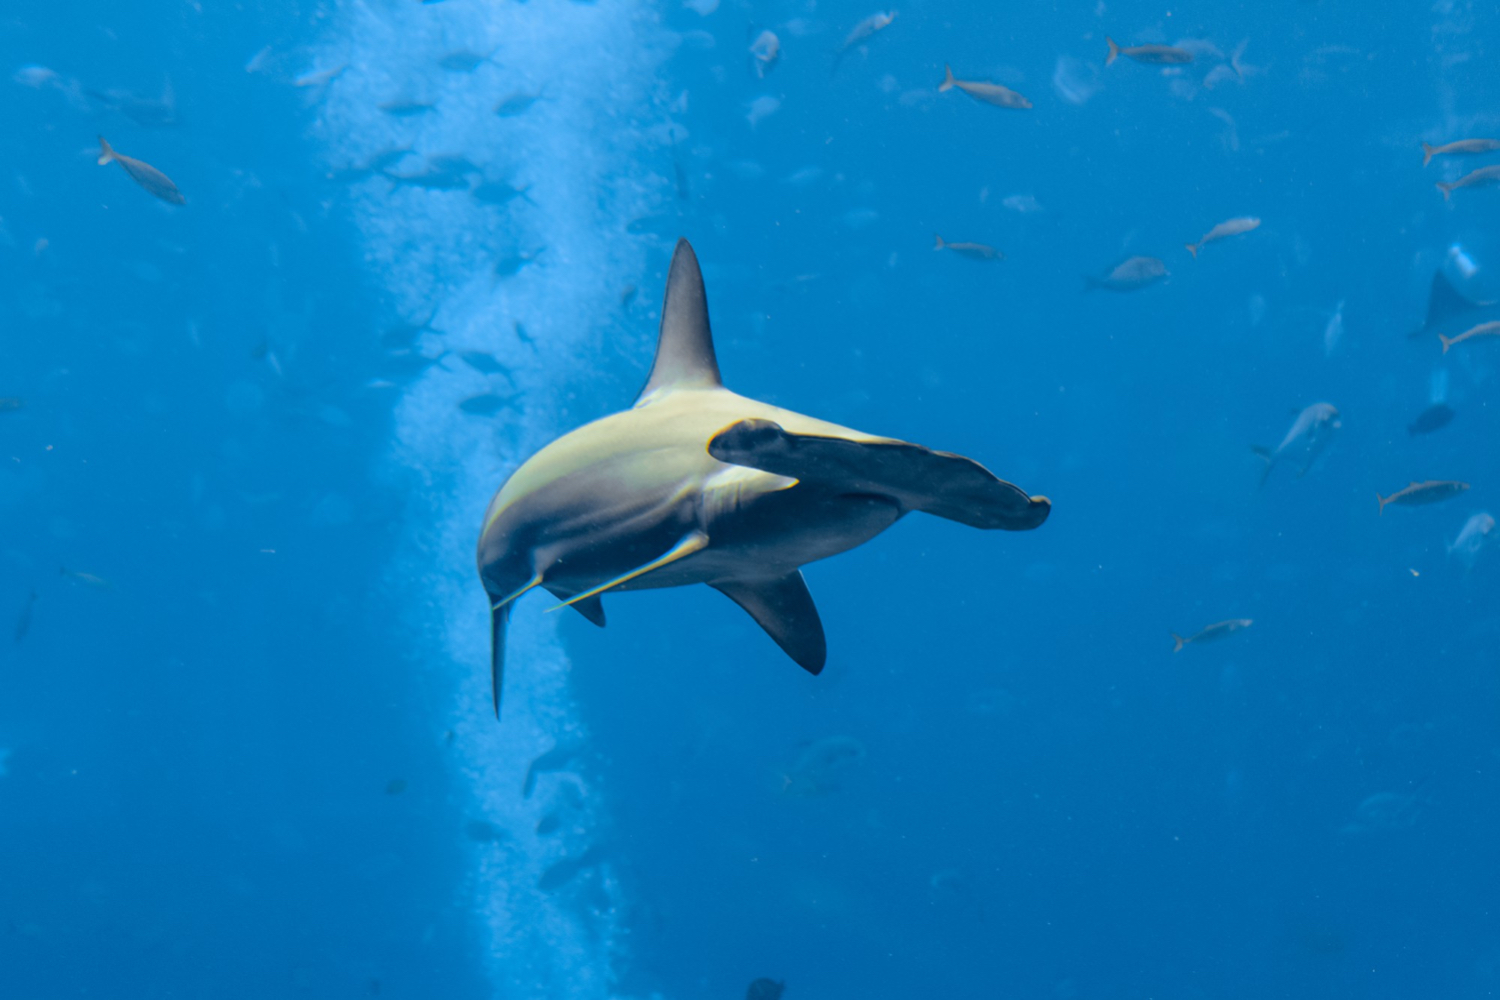 These are the best places for Shark Diving in the world.